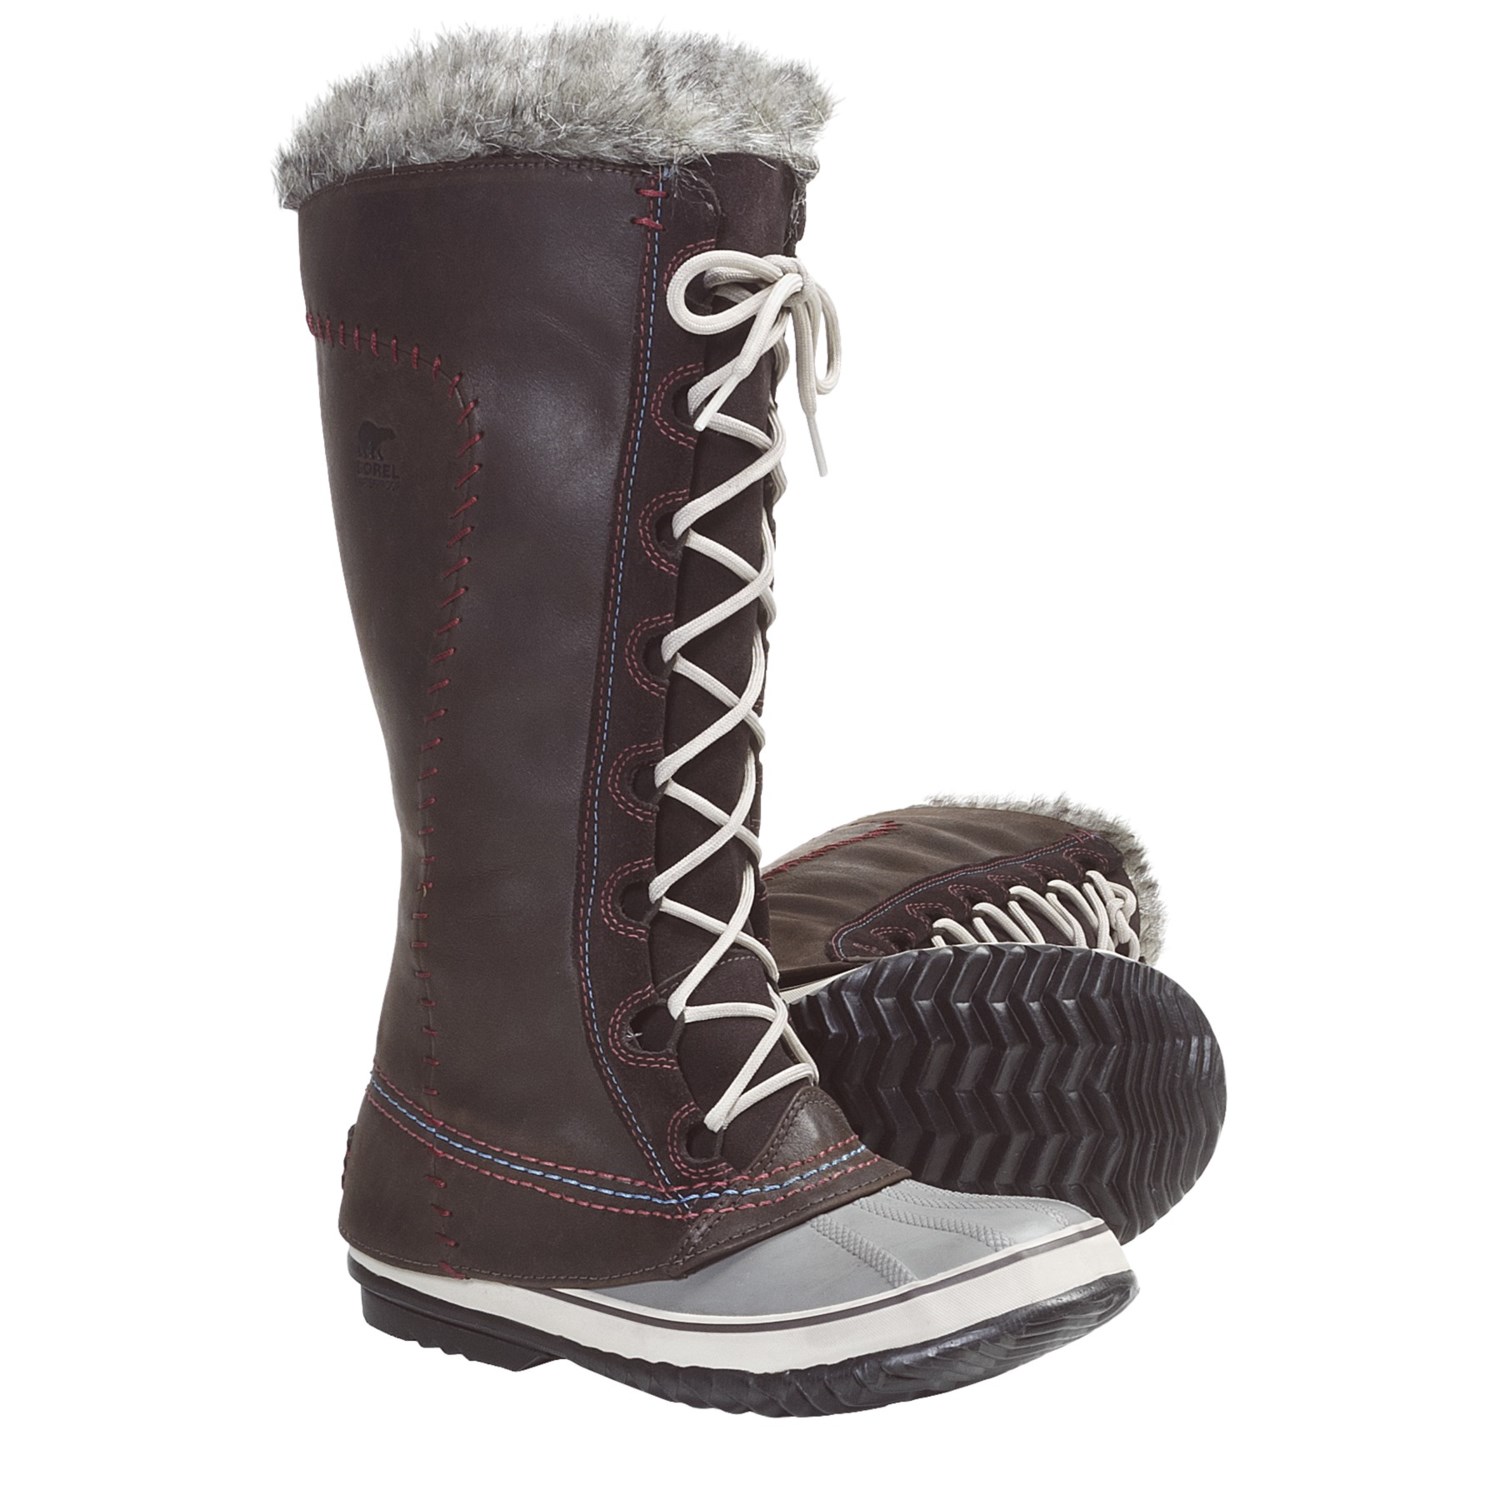 Womens Knee High Waterproof Snow Boots (with image) · PeachCobbler ...